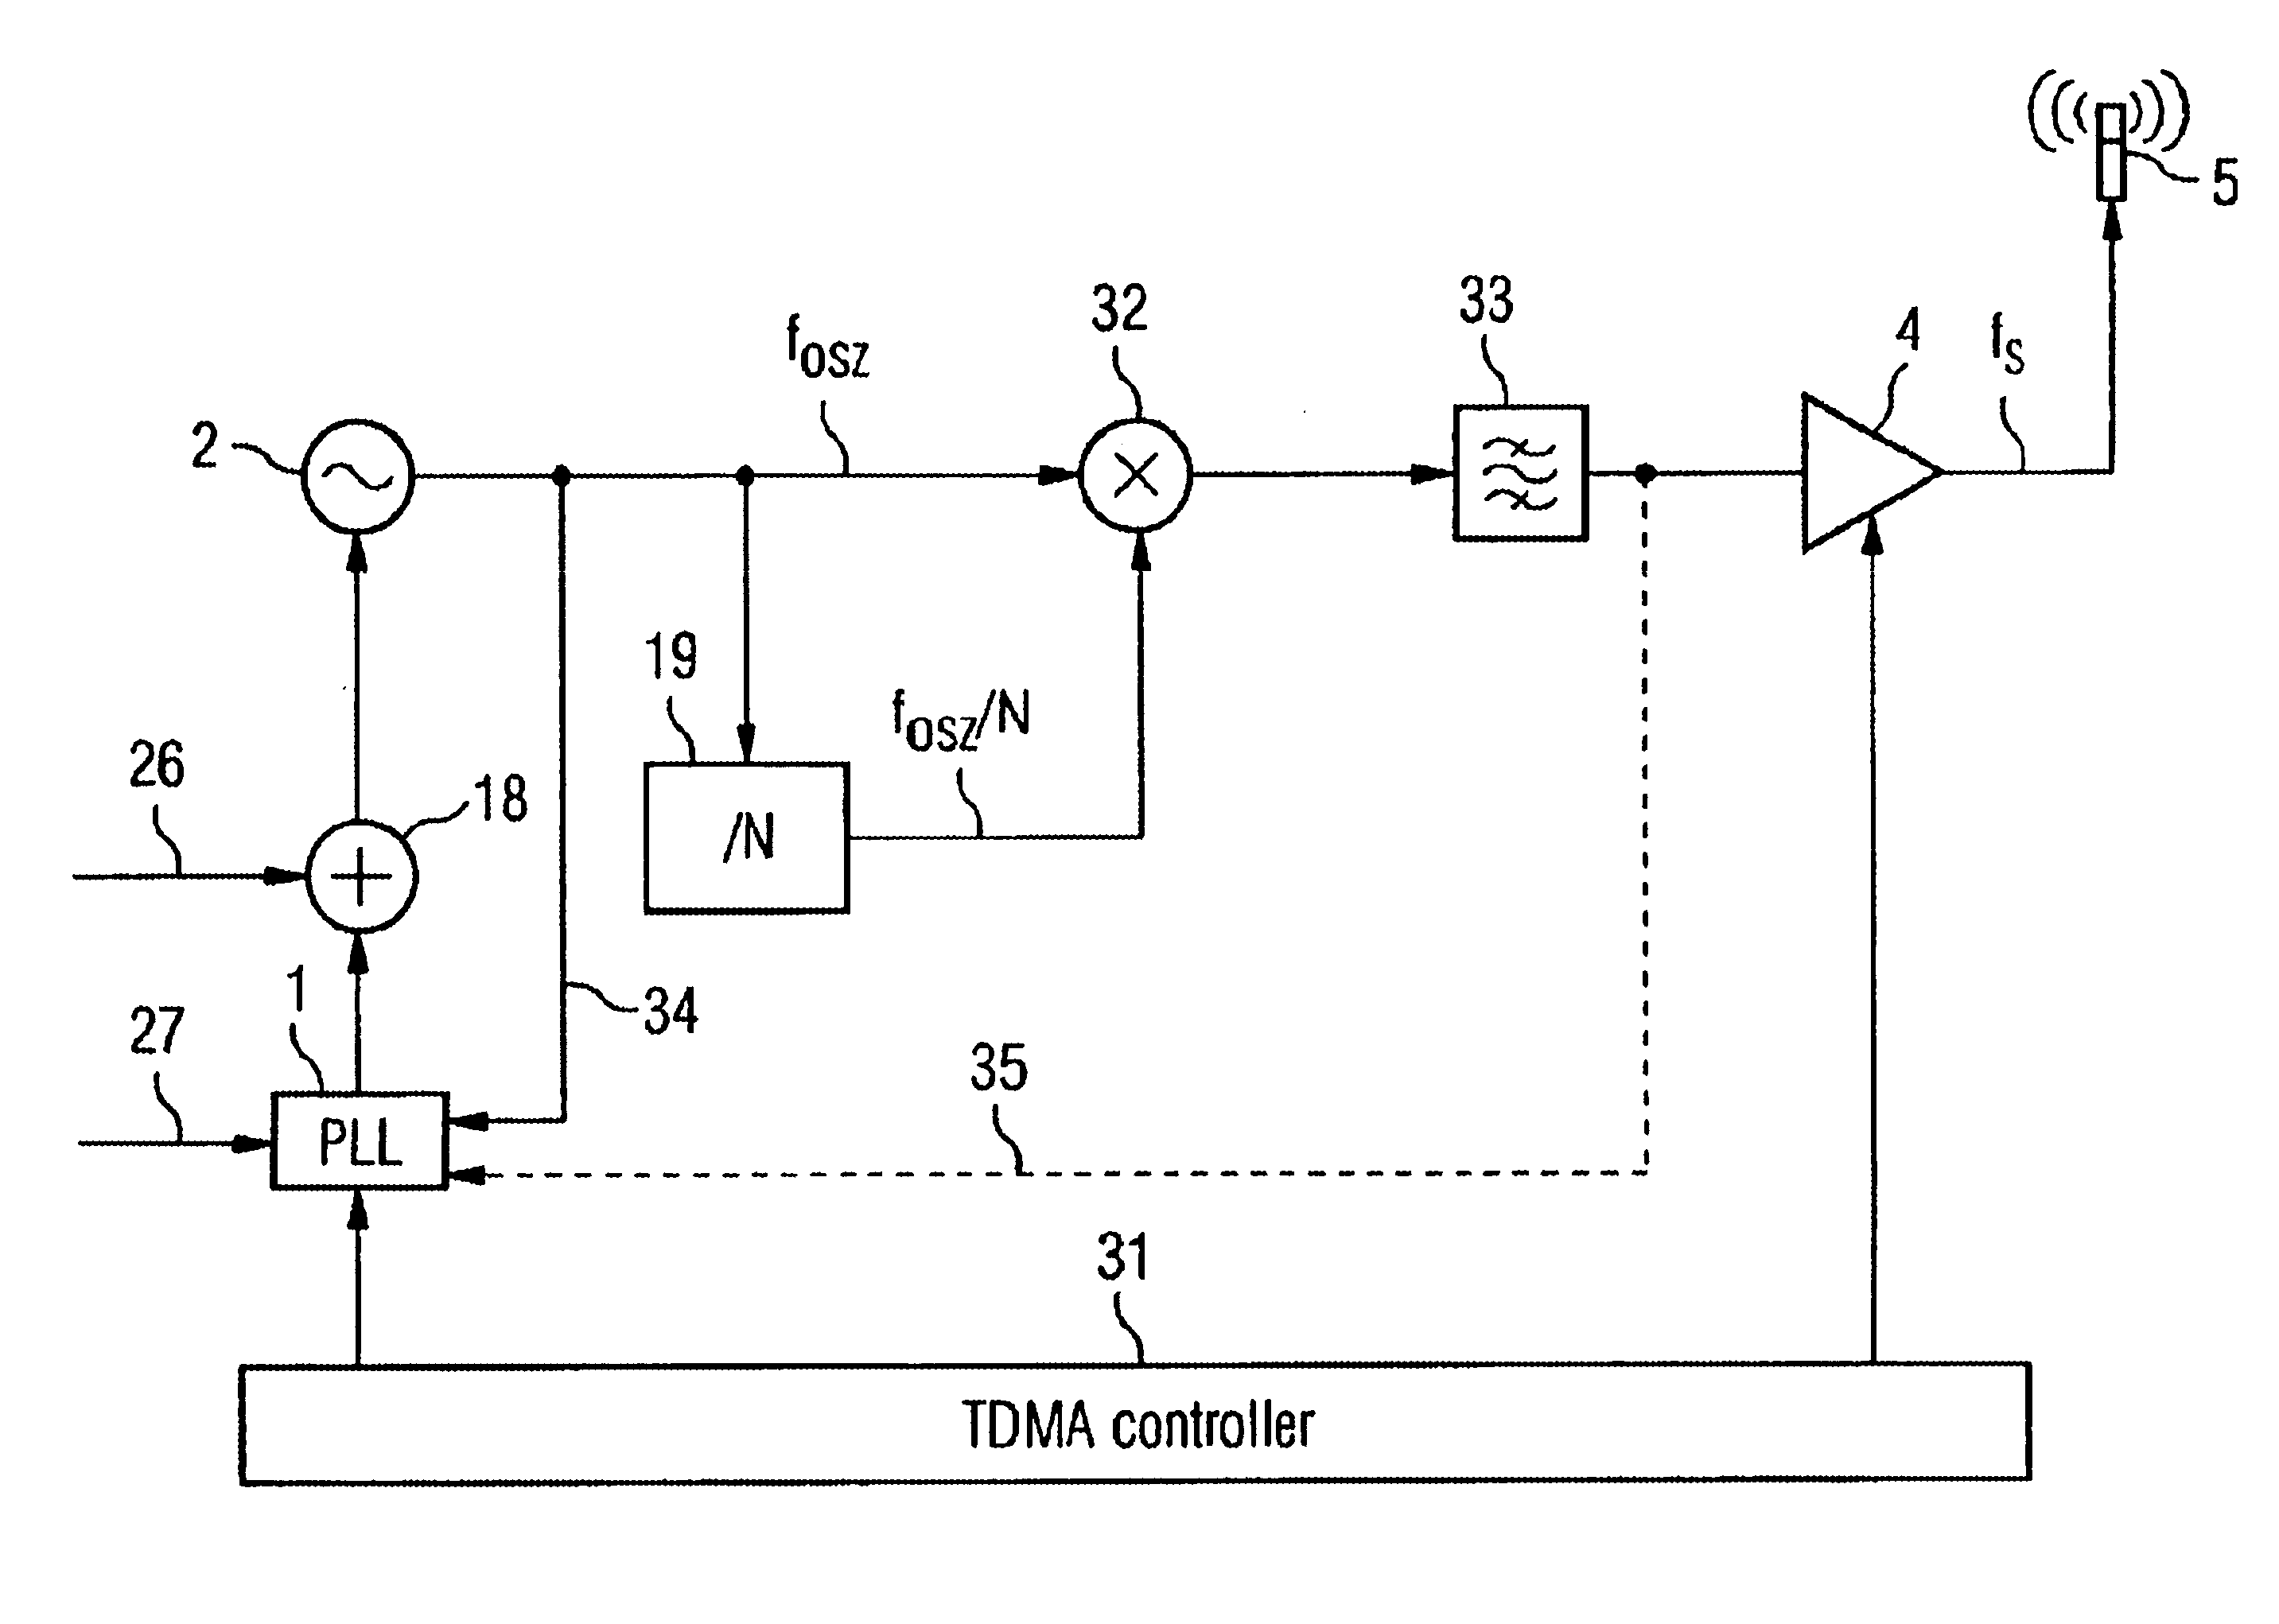 TDMA transmit frequency generator suppressing frequency jumps caused by feedback